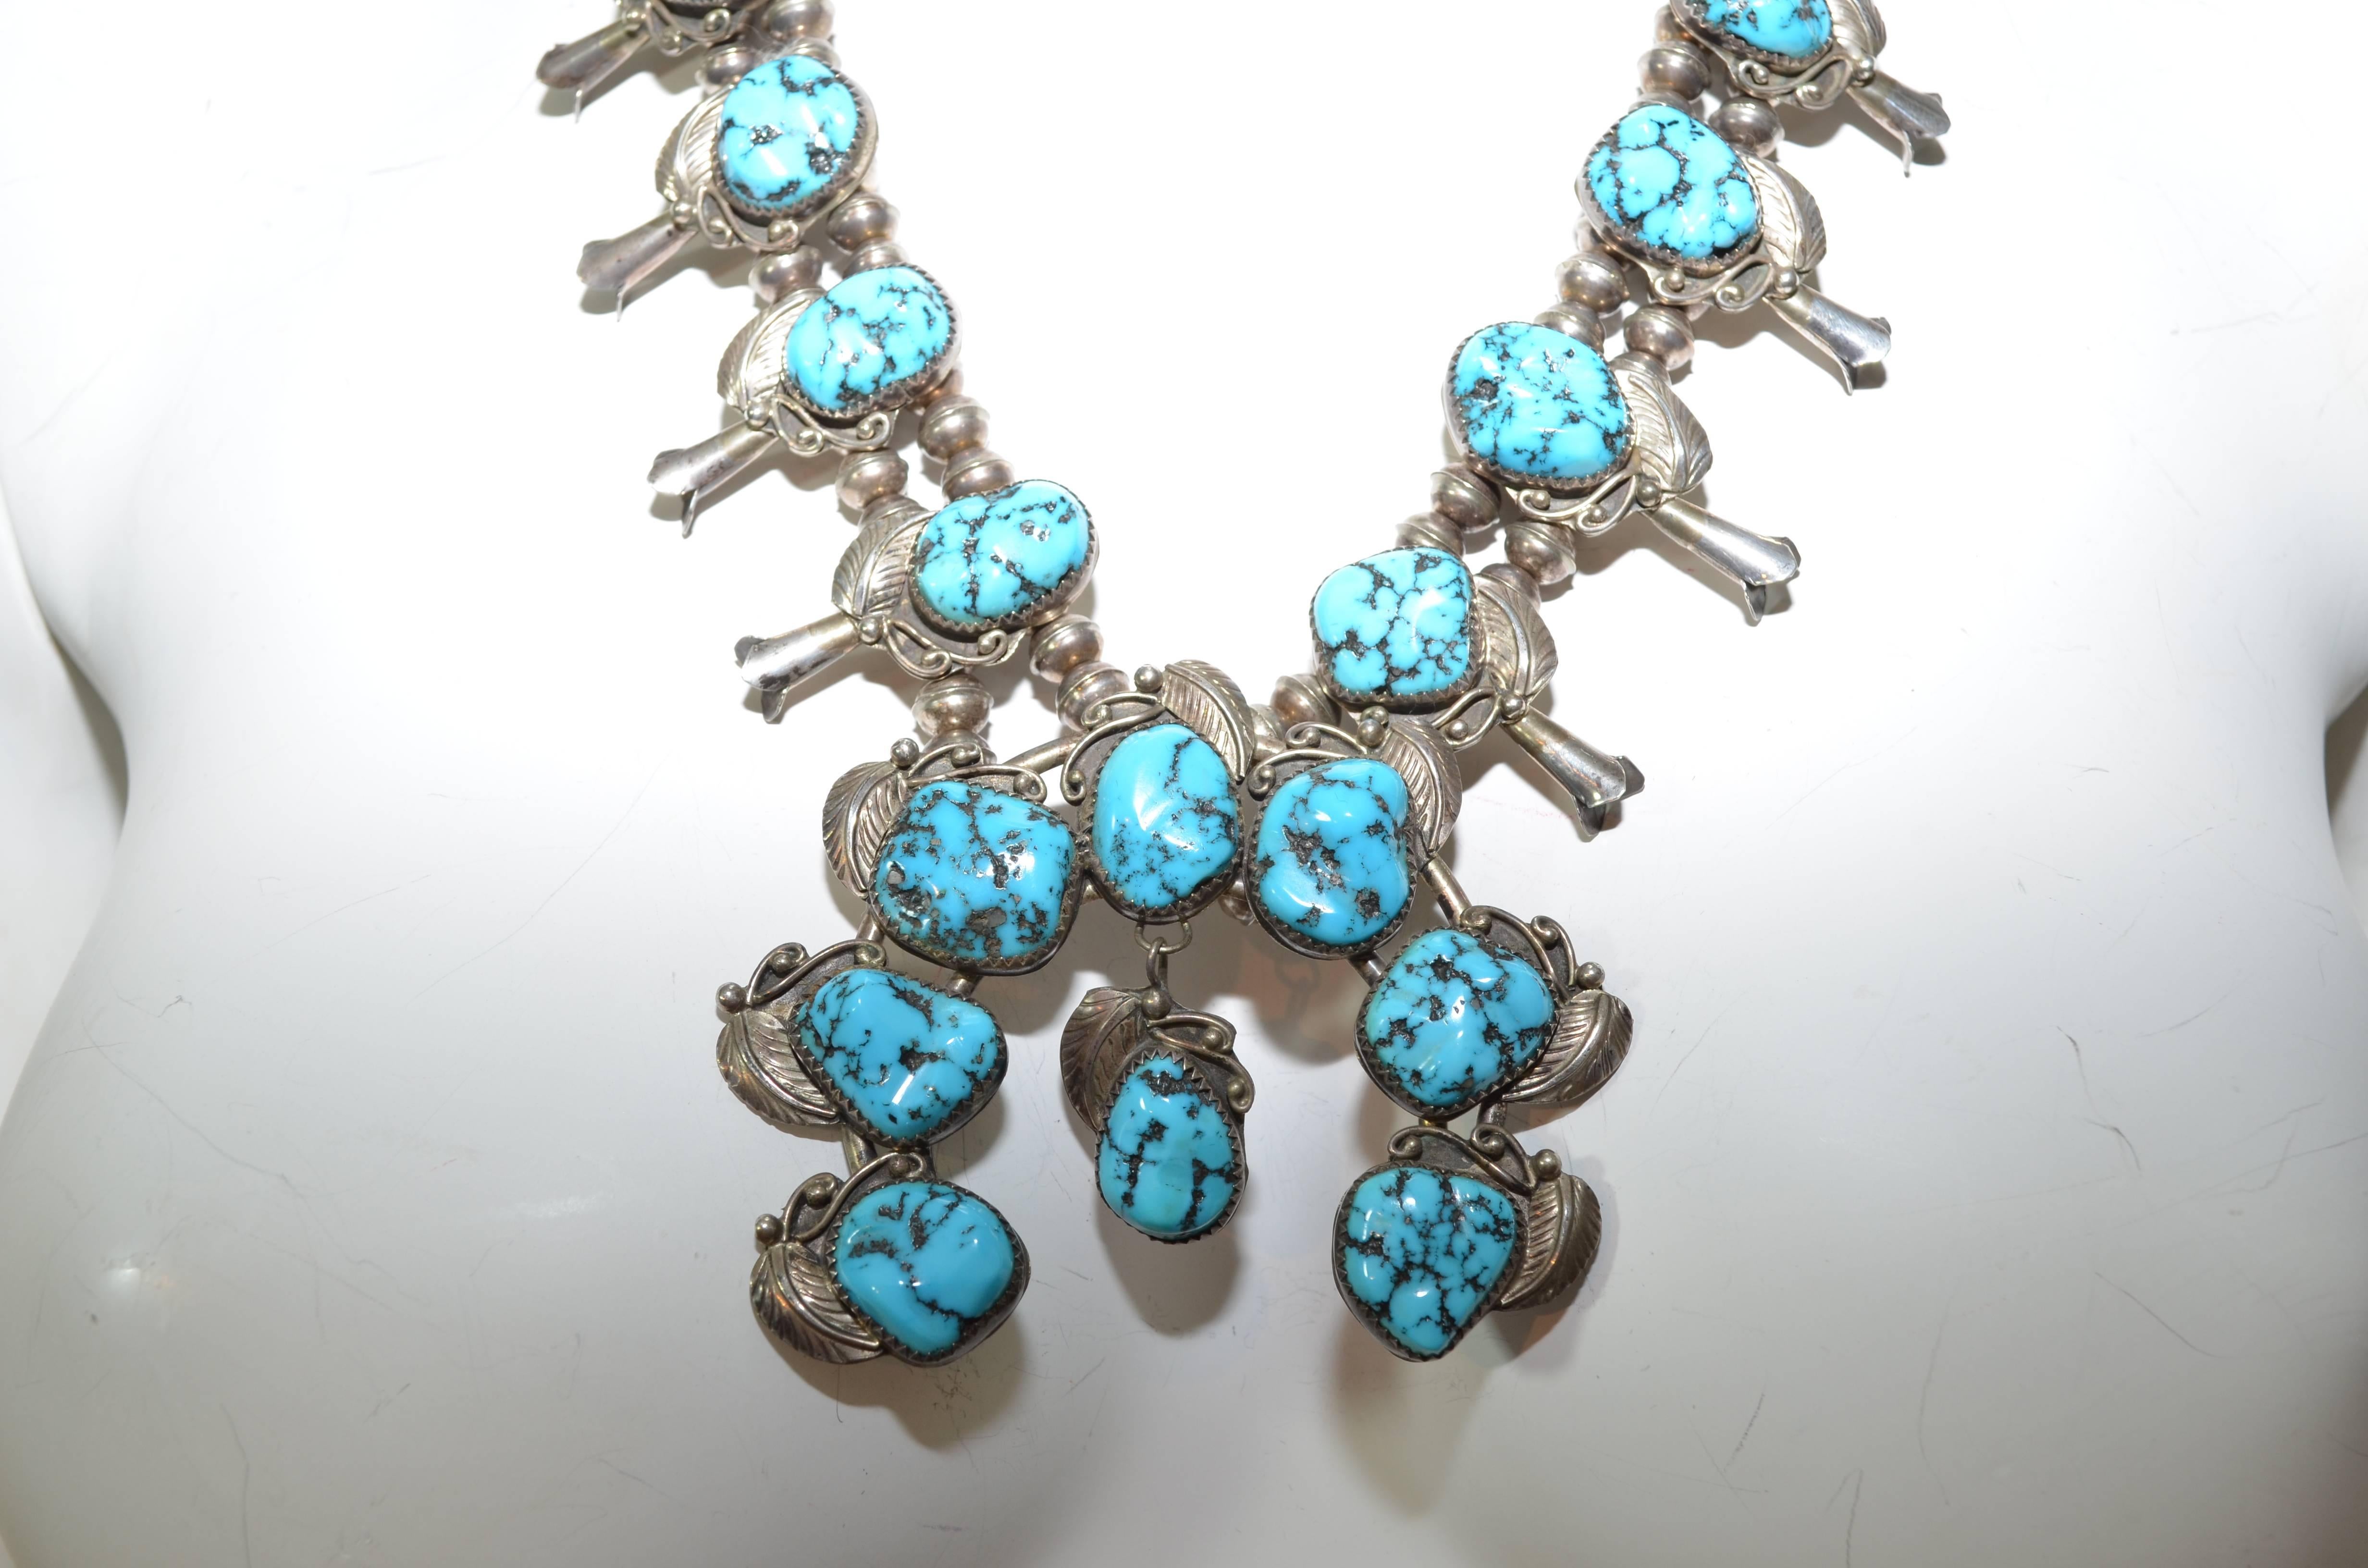 1950s squash blossom Navajo necklace in sterling silver with massive Bisbee turquoise stones. Beautiful ornate details in leaves. Excellent original condition, good patina! Marked STERLING. Hook closure. Length= 14'', weight = 120 grams

In Native